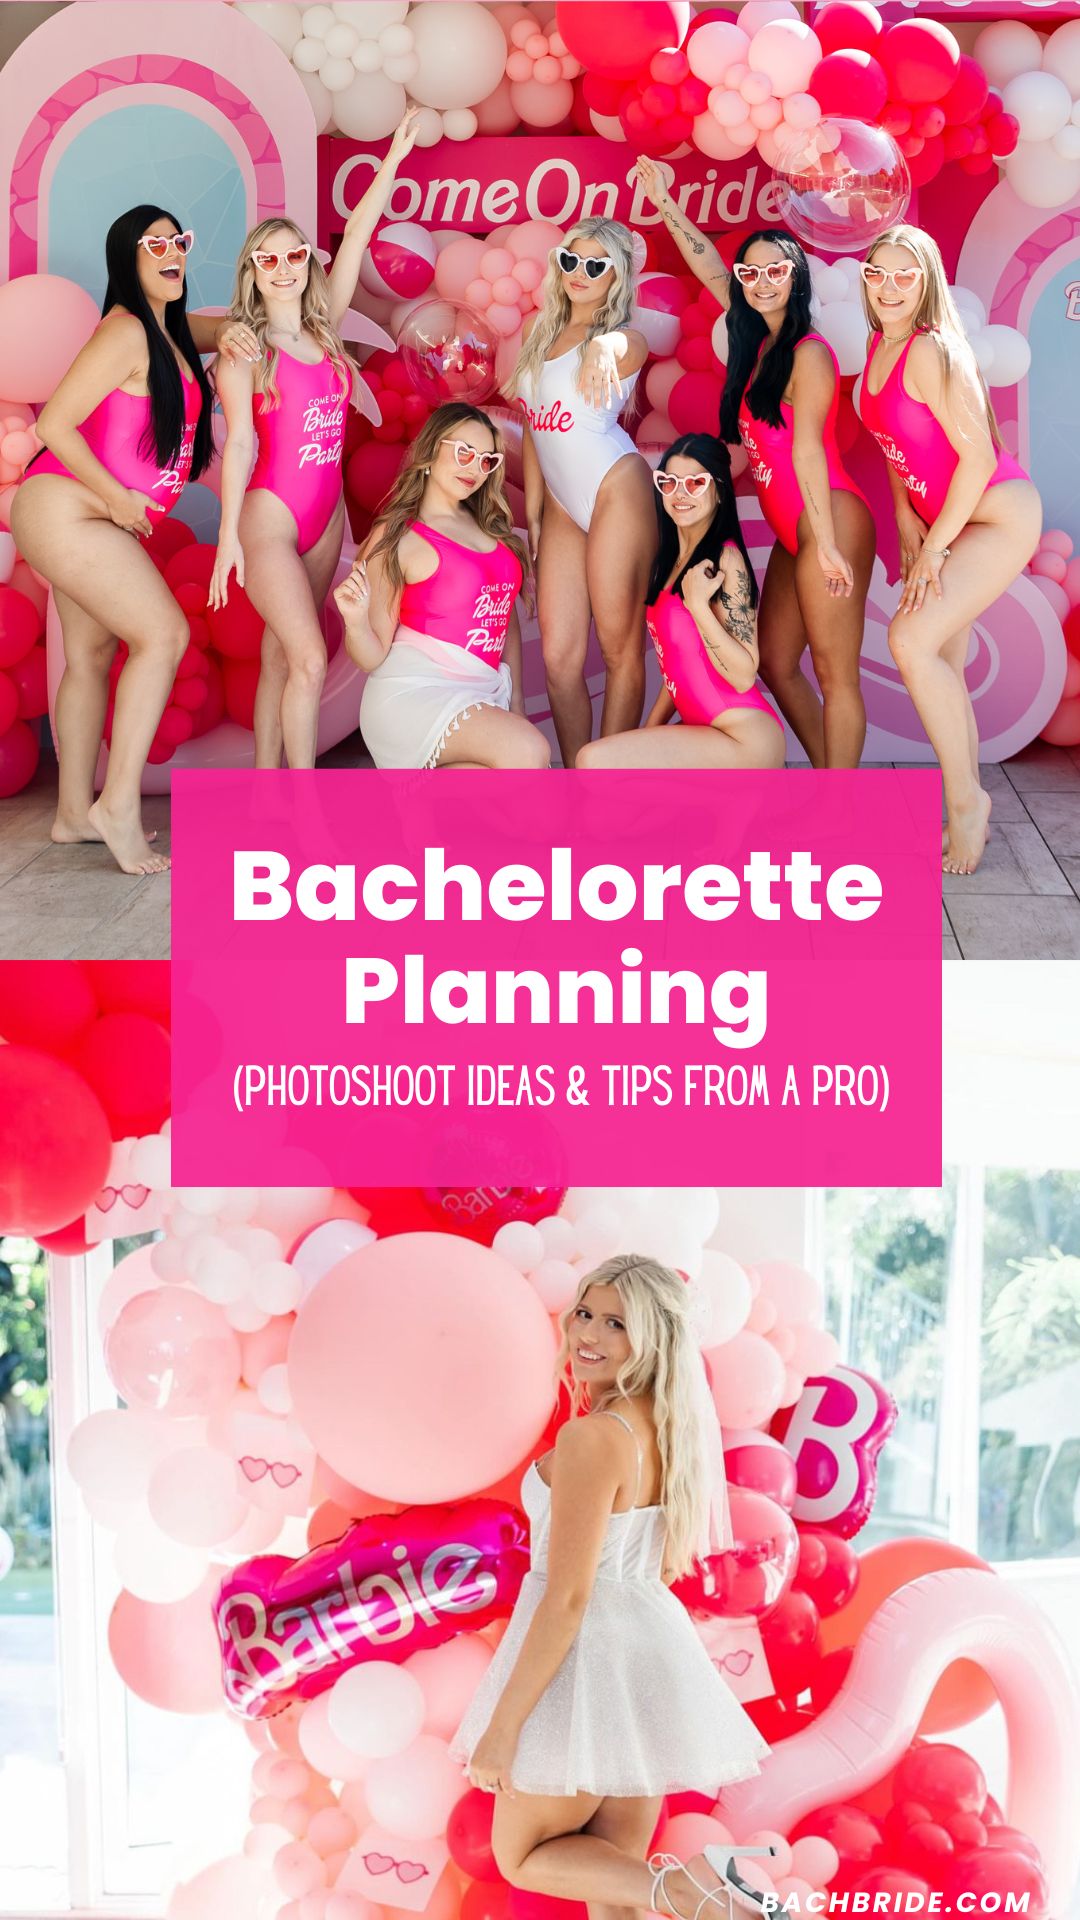 Bachelorette Party: Planning An Epic Photoshoot